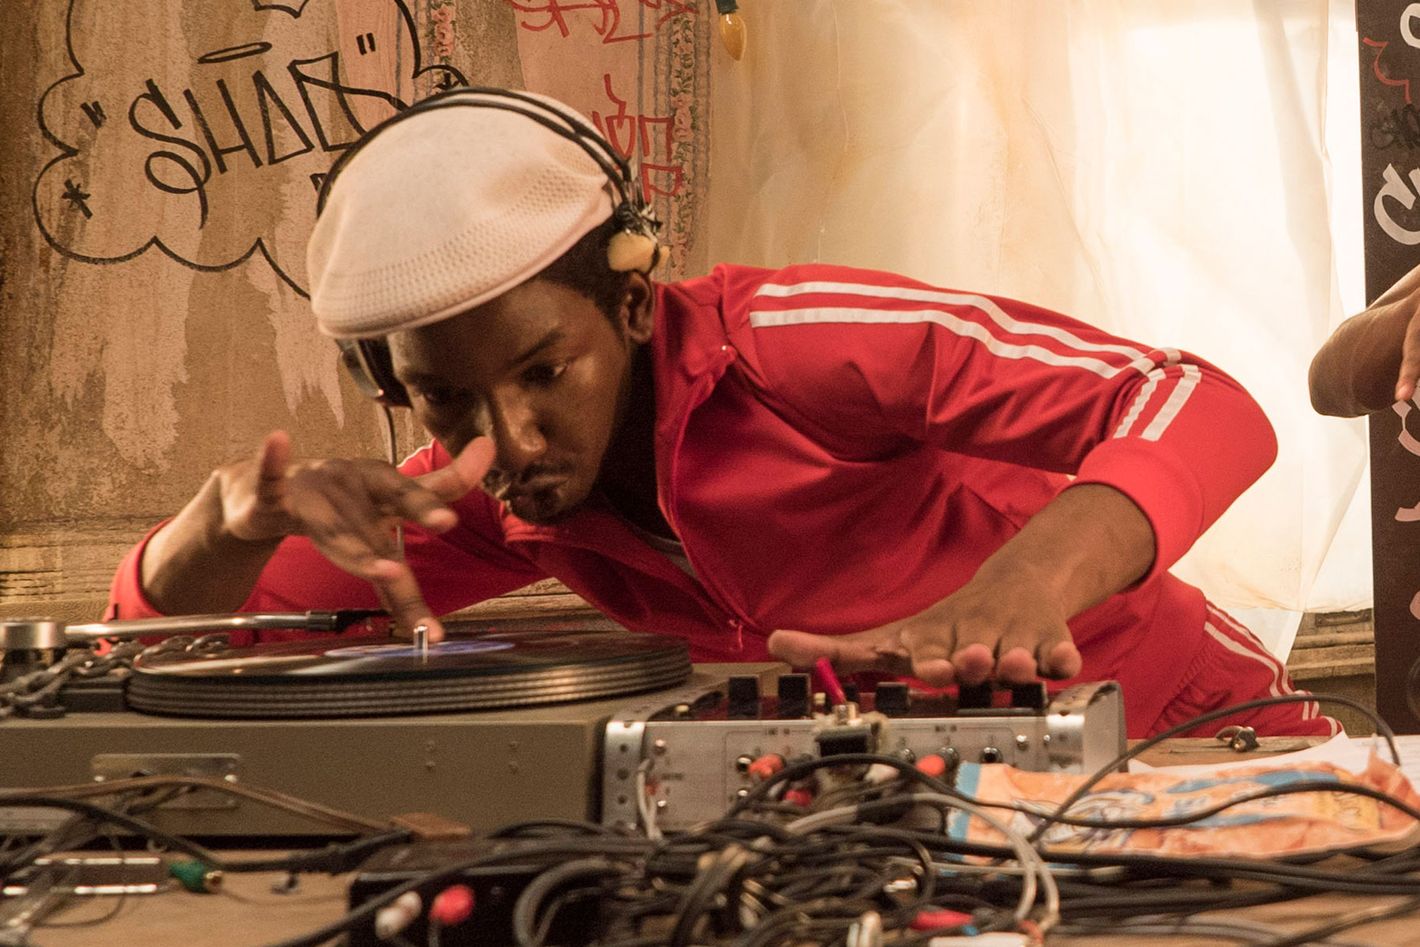 Grandmaster Flash on 'The Get Down' and how he used science to pioneer DJ  techniques - The Washington Post